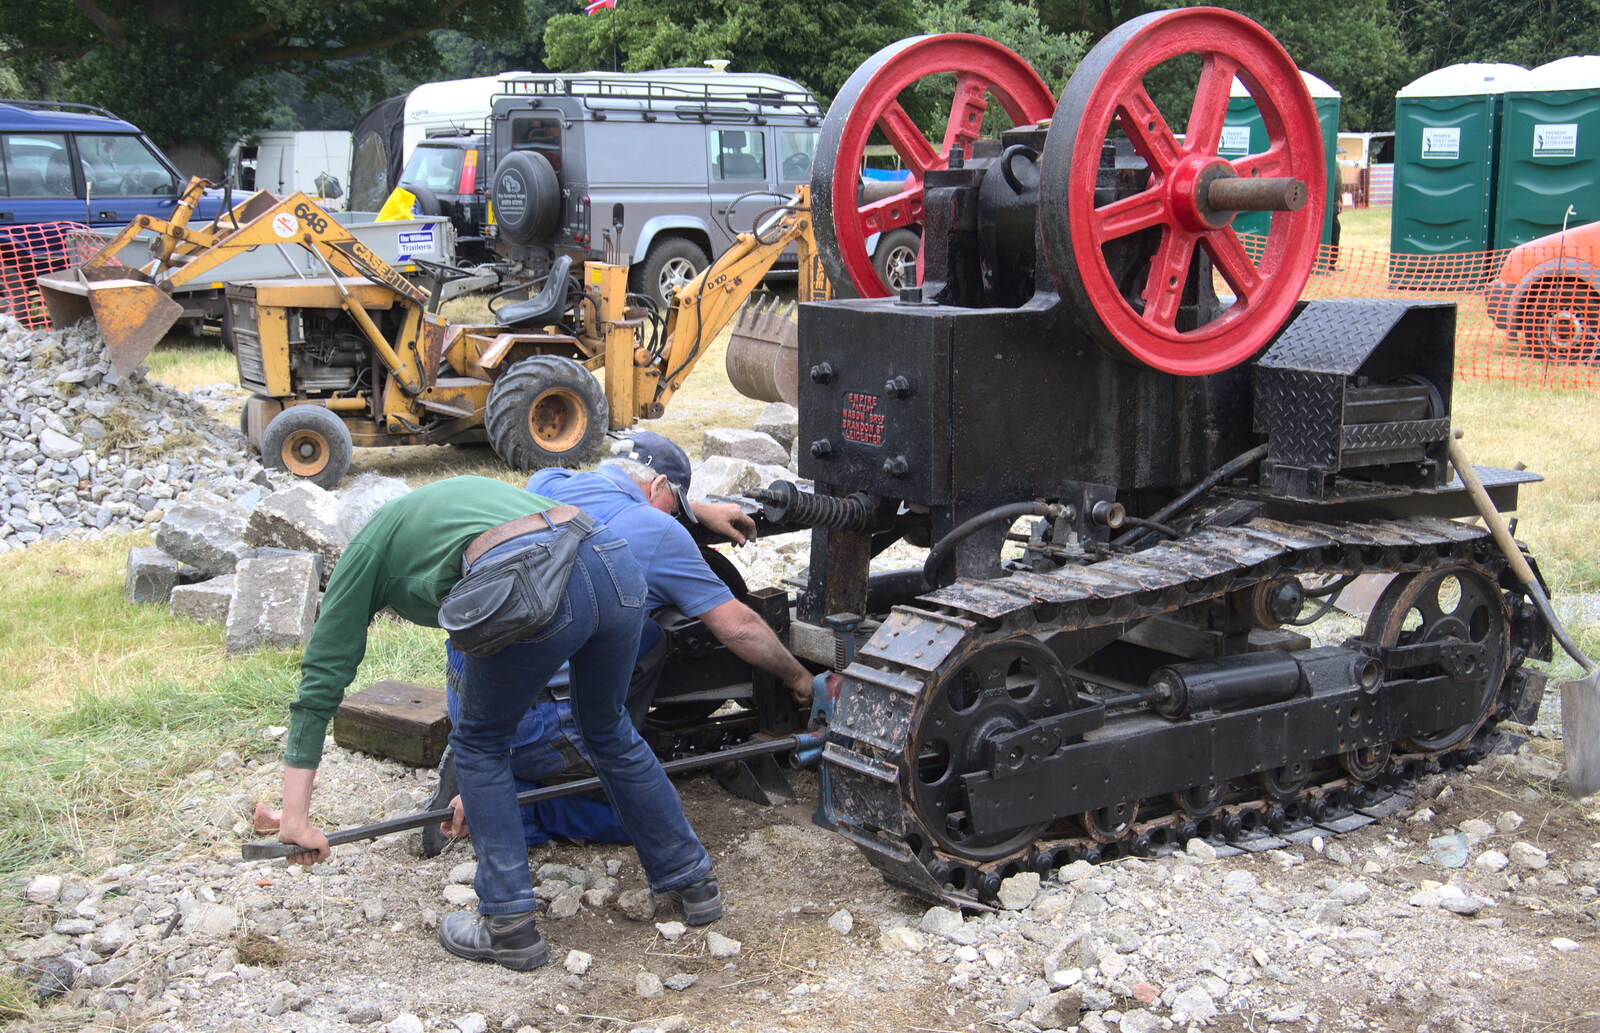 An engine is poked with an iron rod from The Formerly-Known-As-The-Eye-Show, Palgrave, Suffolk - 17th June 2018